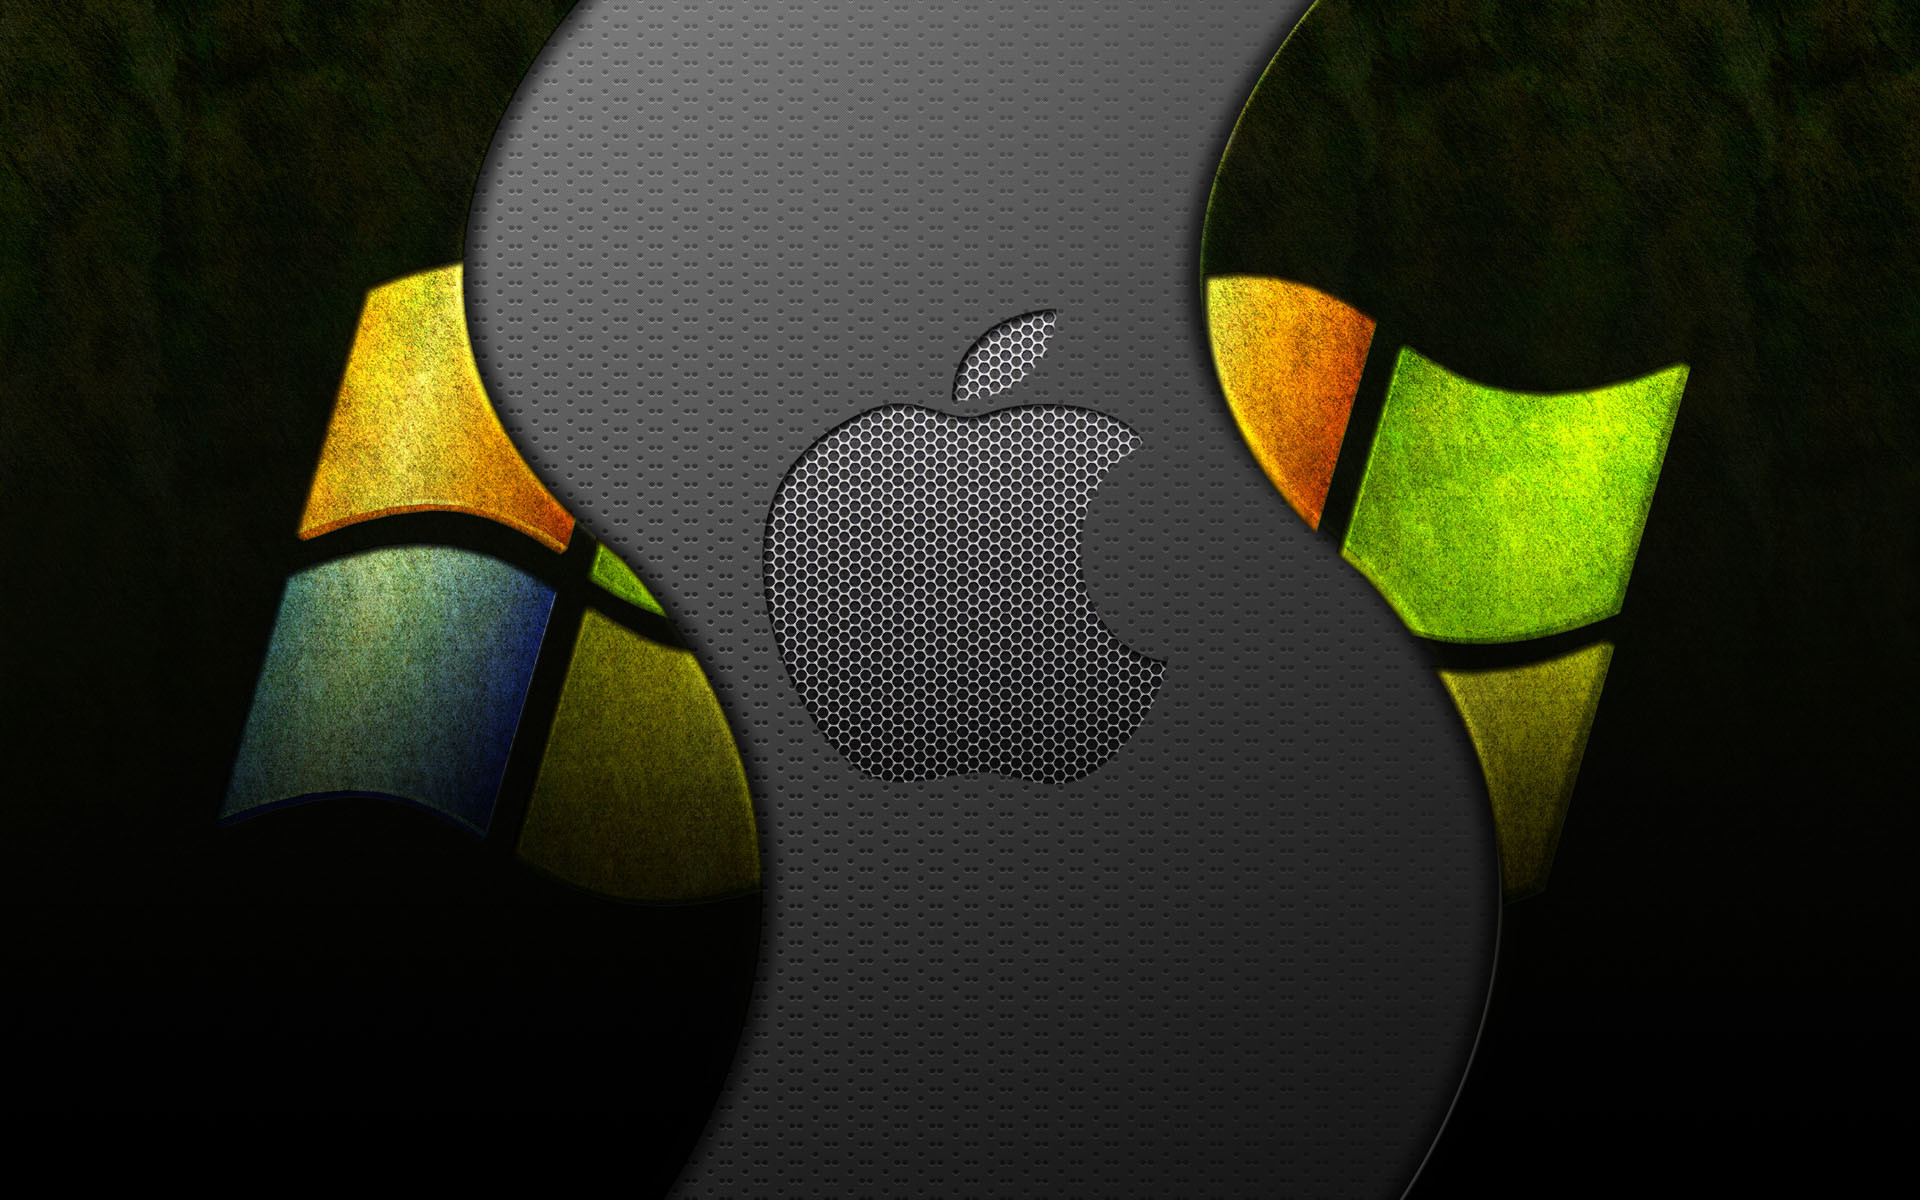 How to install windows 7 on mac os x lion by bootcamp Next Question